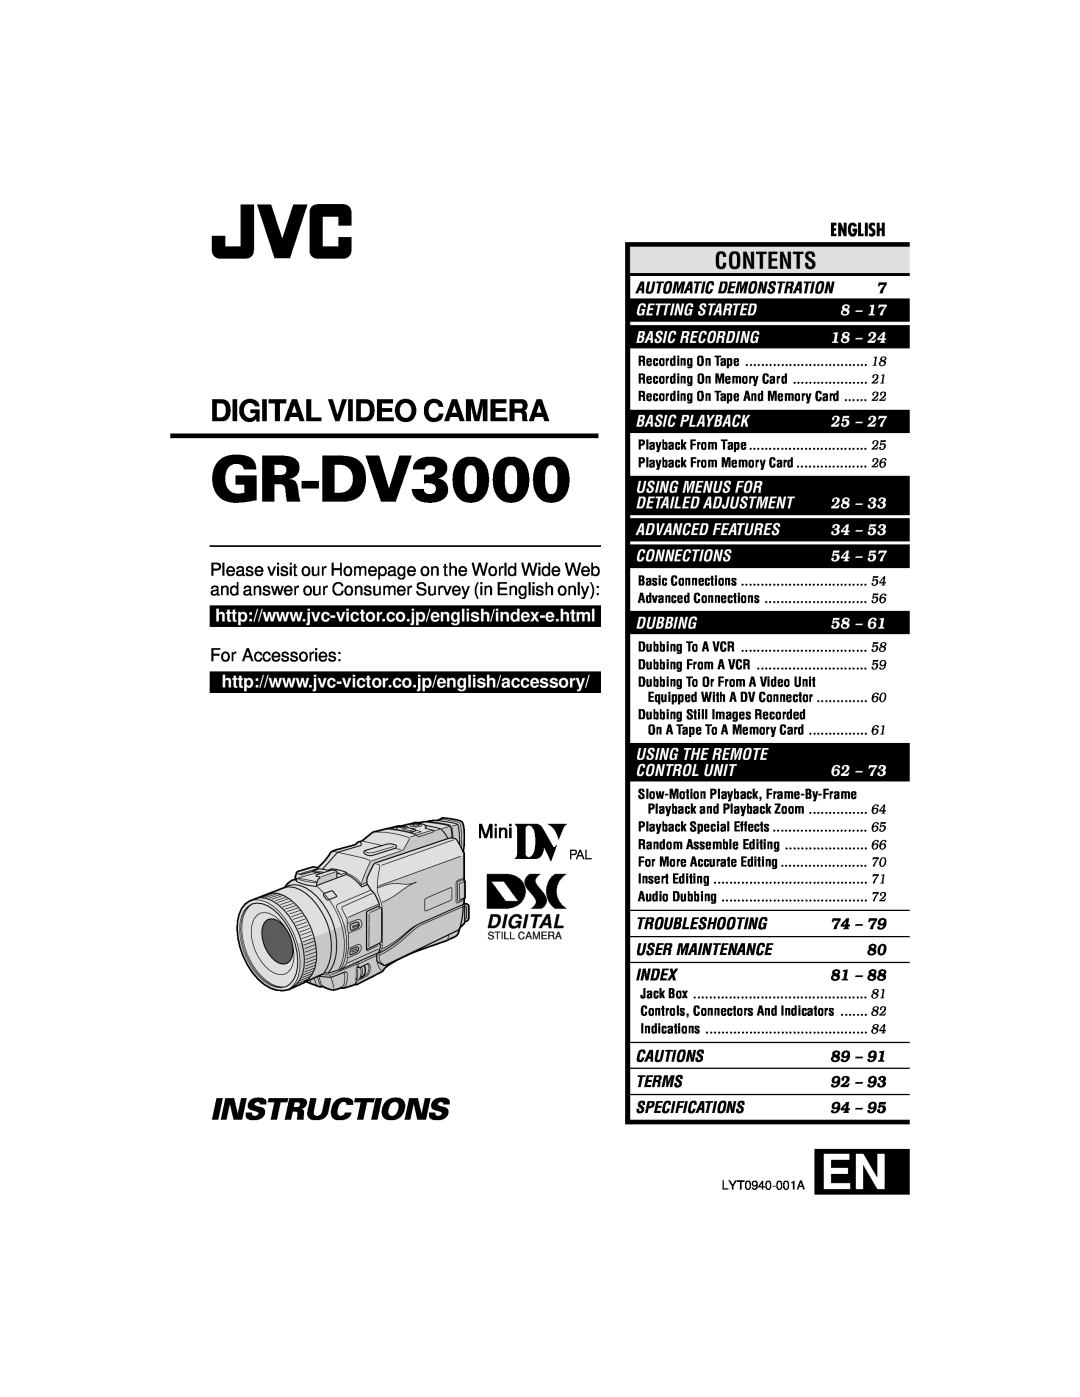 JVC specifications For Accessories, GR-DV3000, Digital Video Camera, Instructions, Contents, English, Troubleshooting 